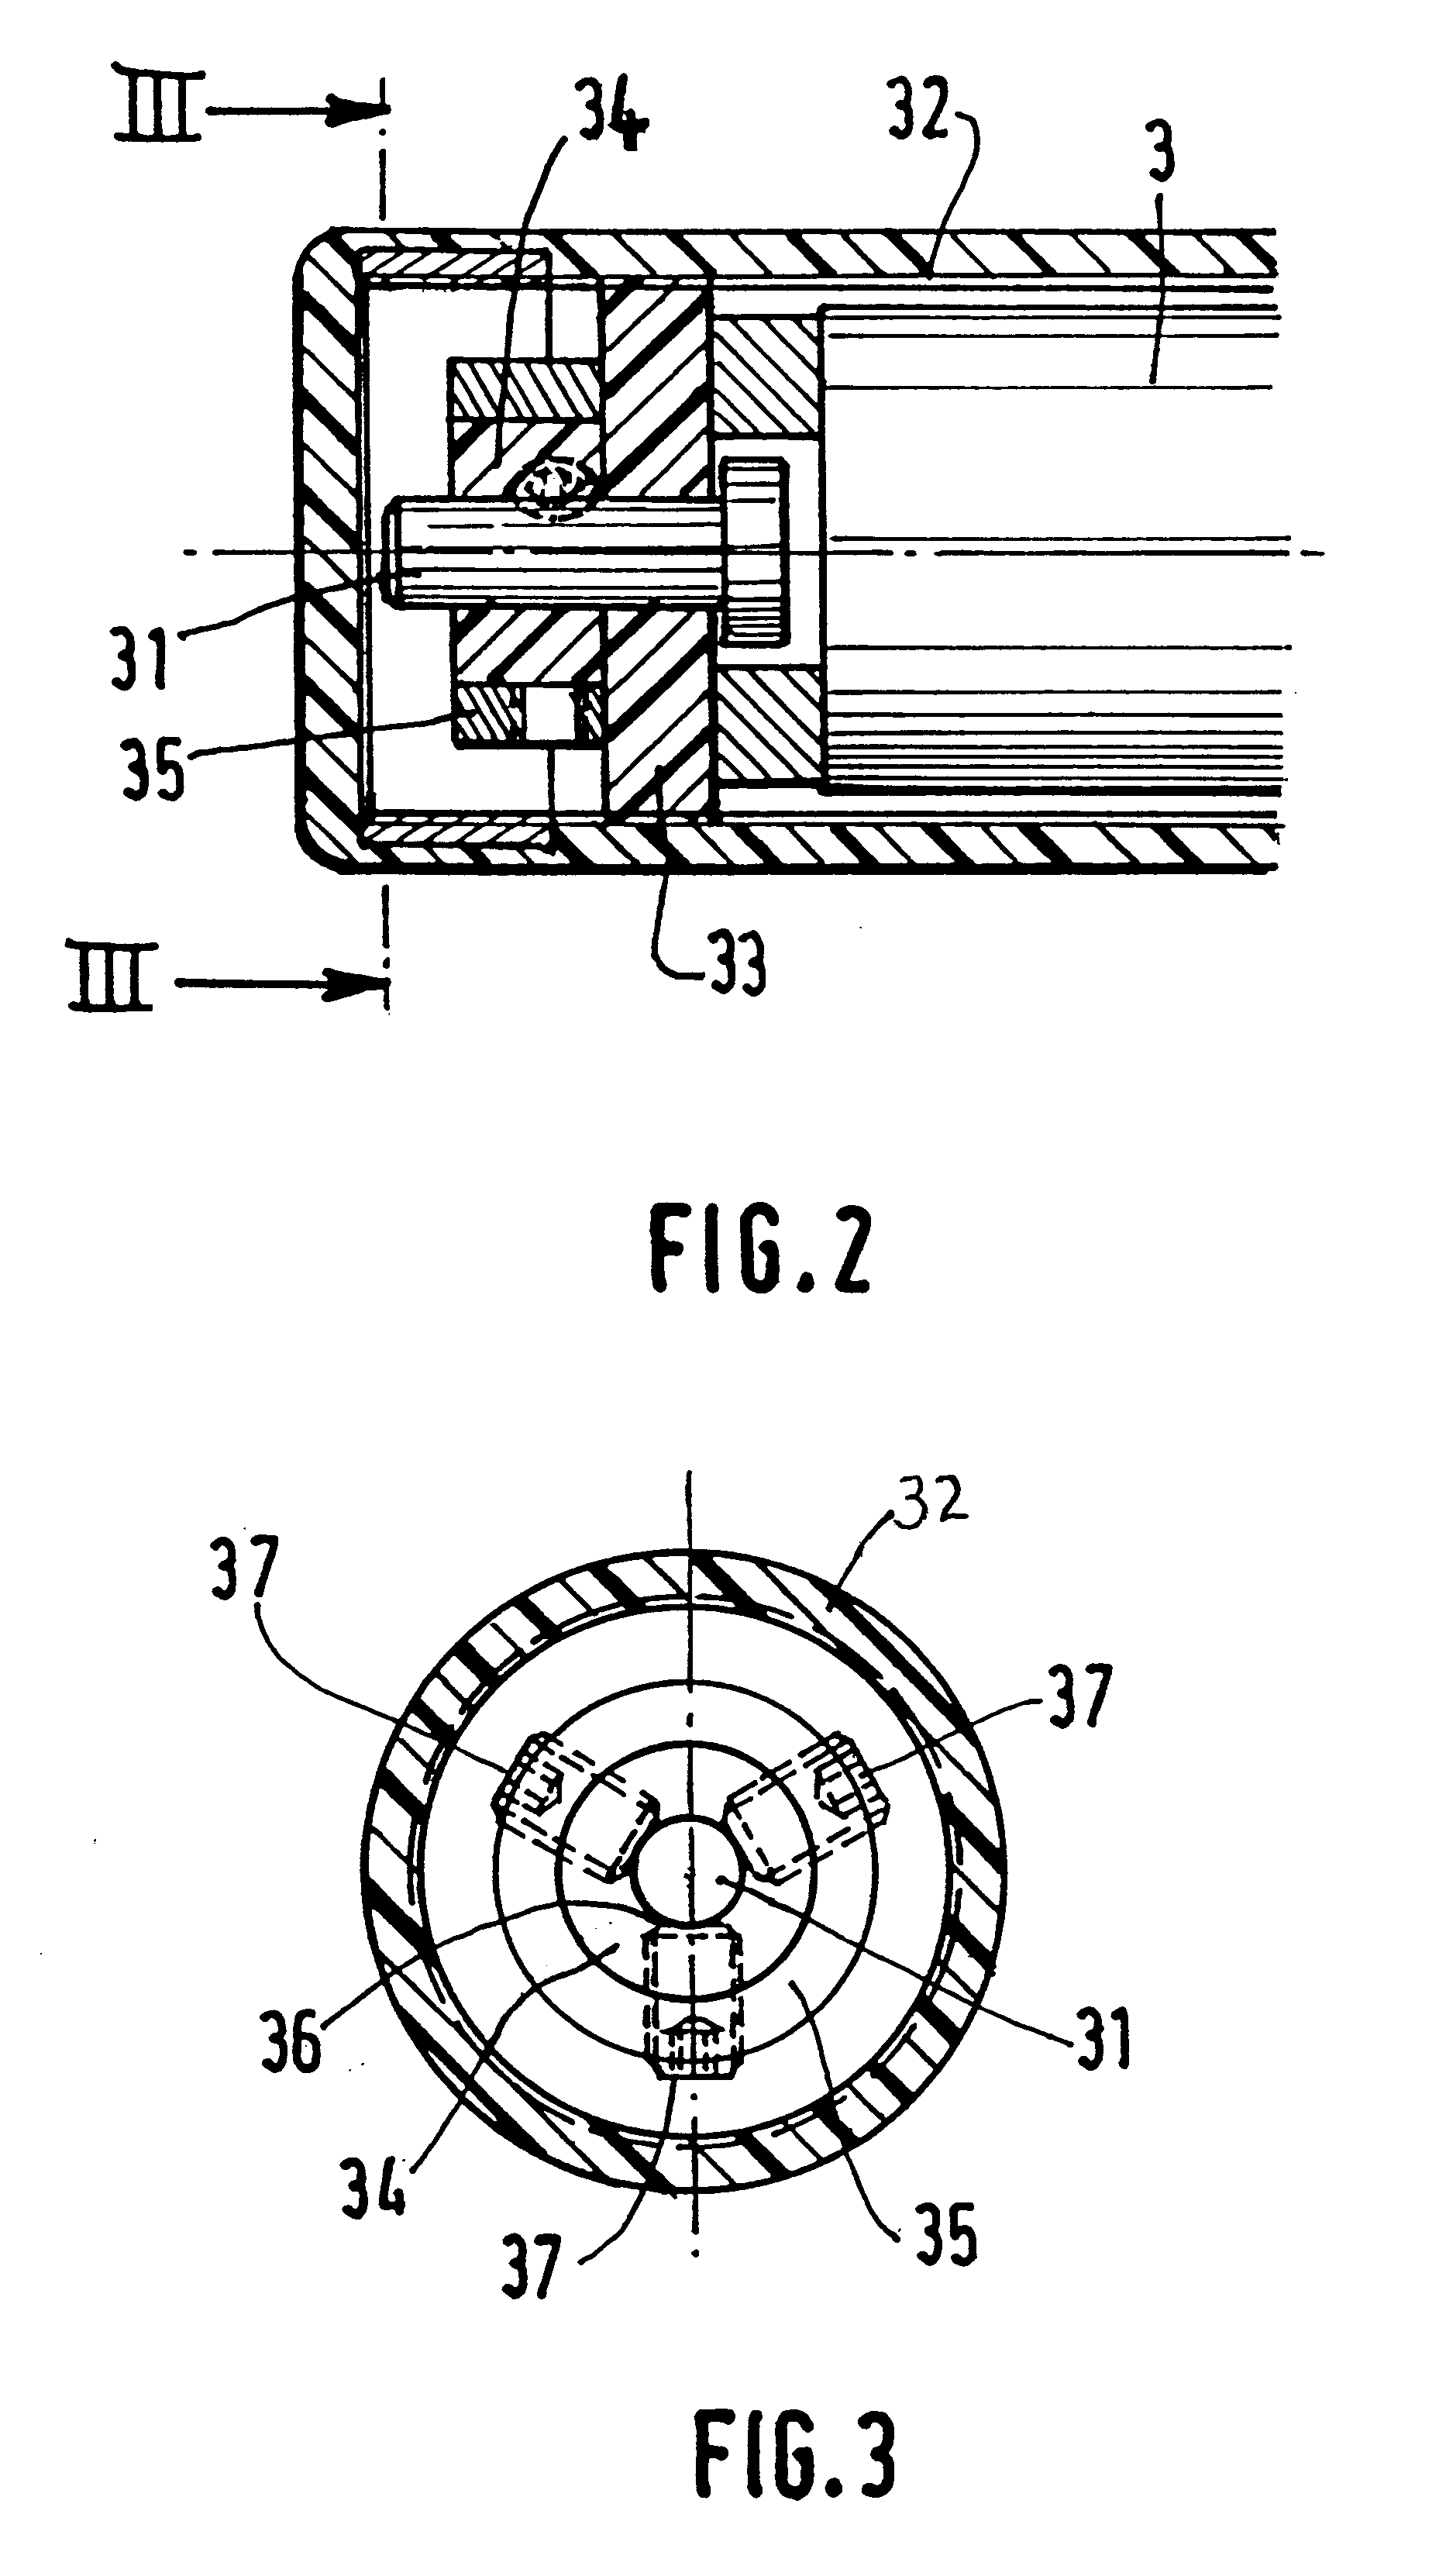 Injector for medical use